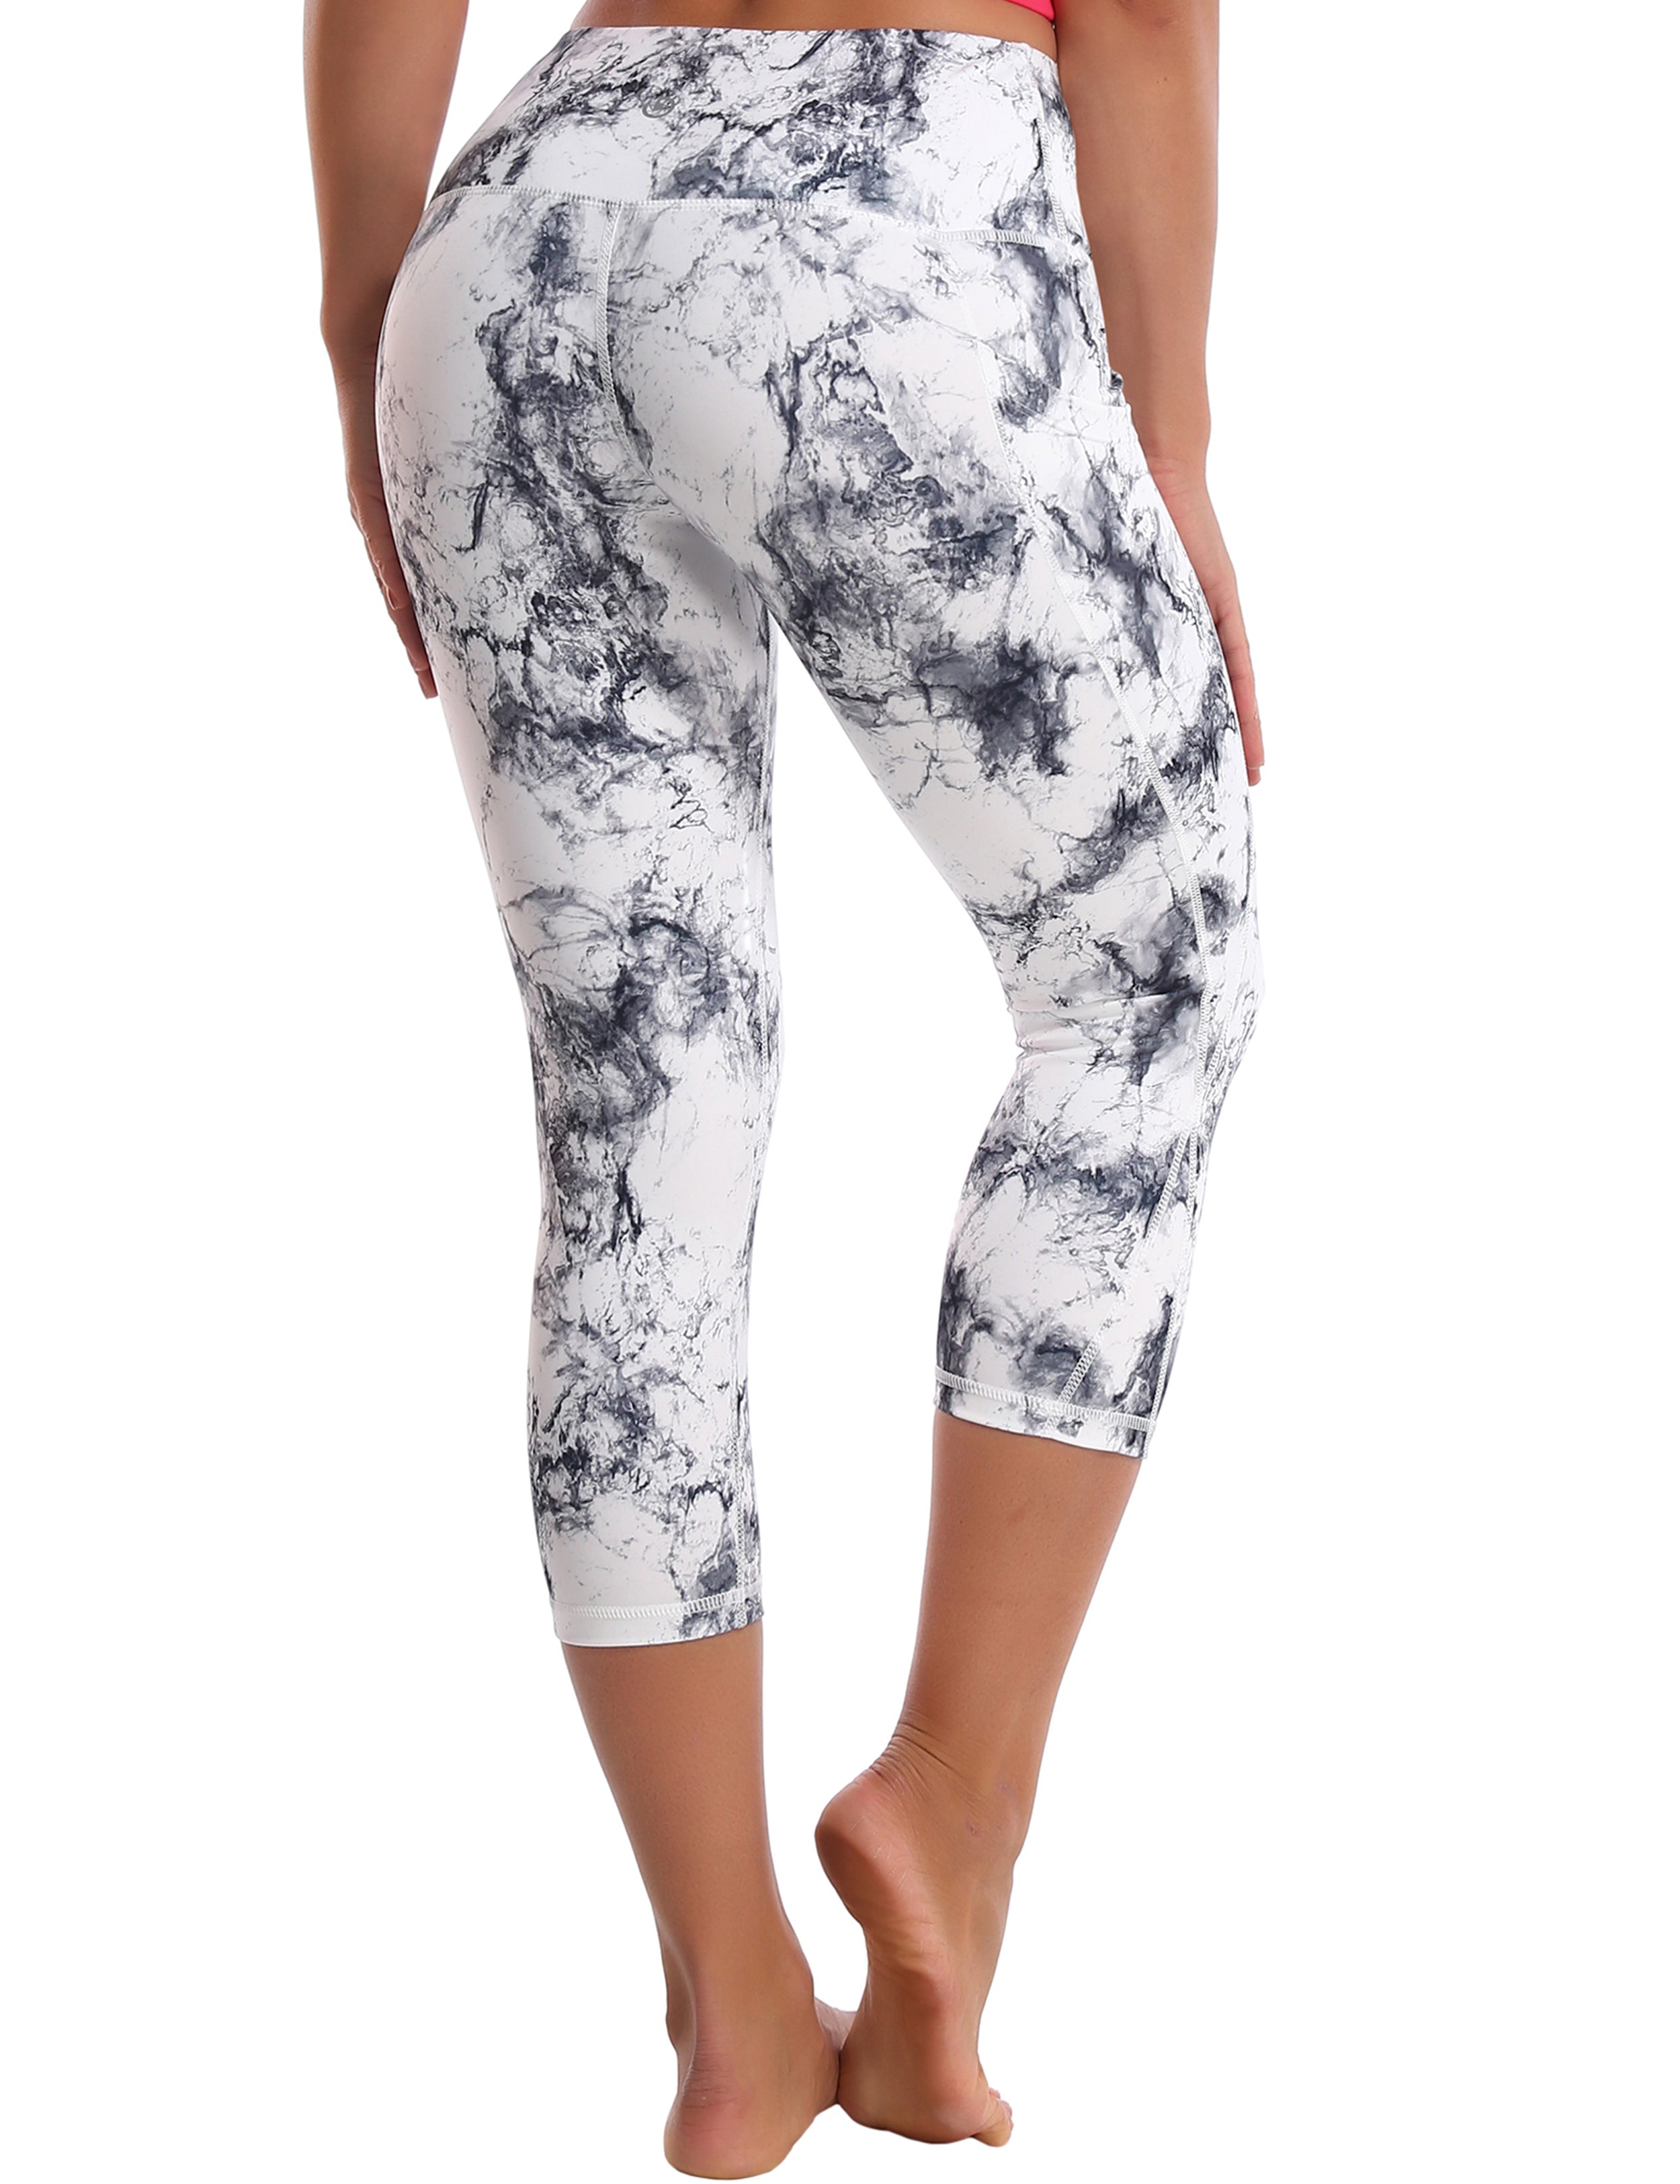 19" High Waist Side Pockets Capris arabescato 75%Nylon/25%Spandex Fabric doesn't attract lint easily 4-way stretch No see-through Moisture-wicking Tummy control Inner pocket